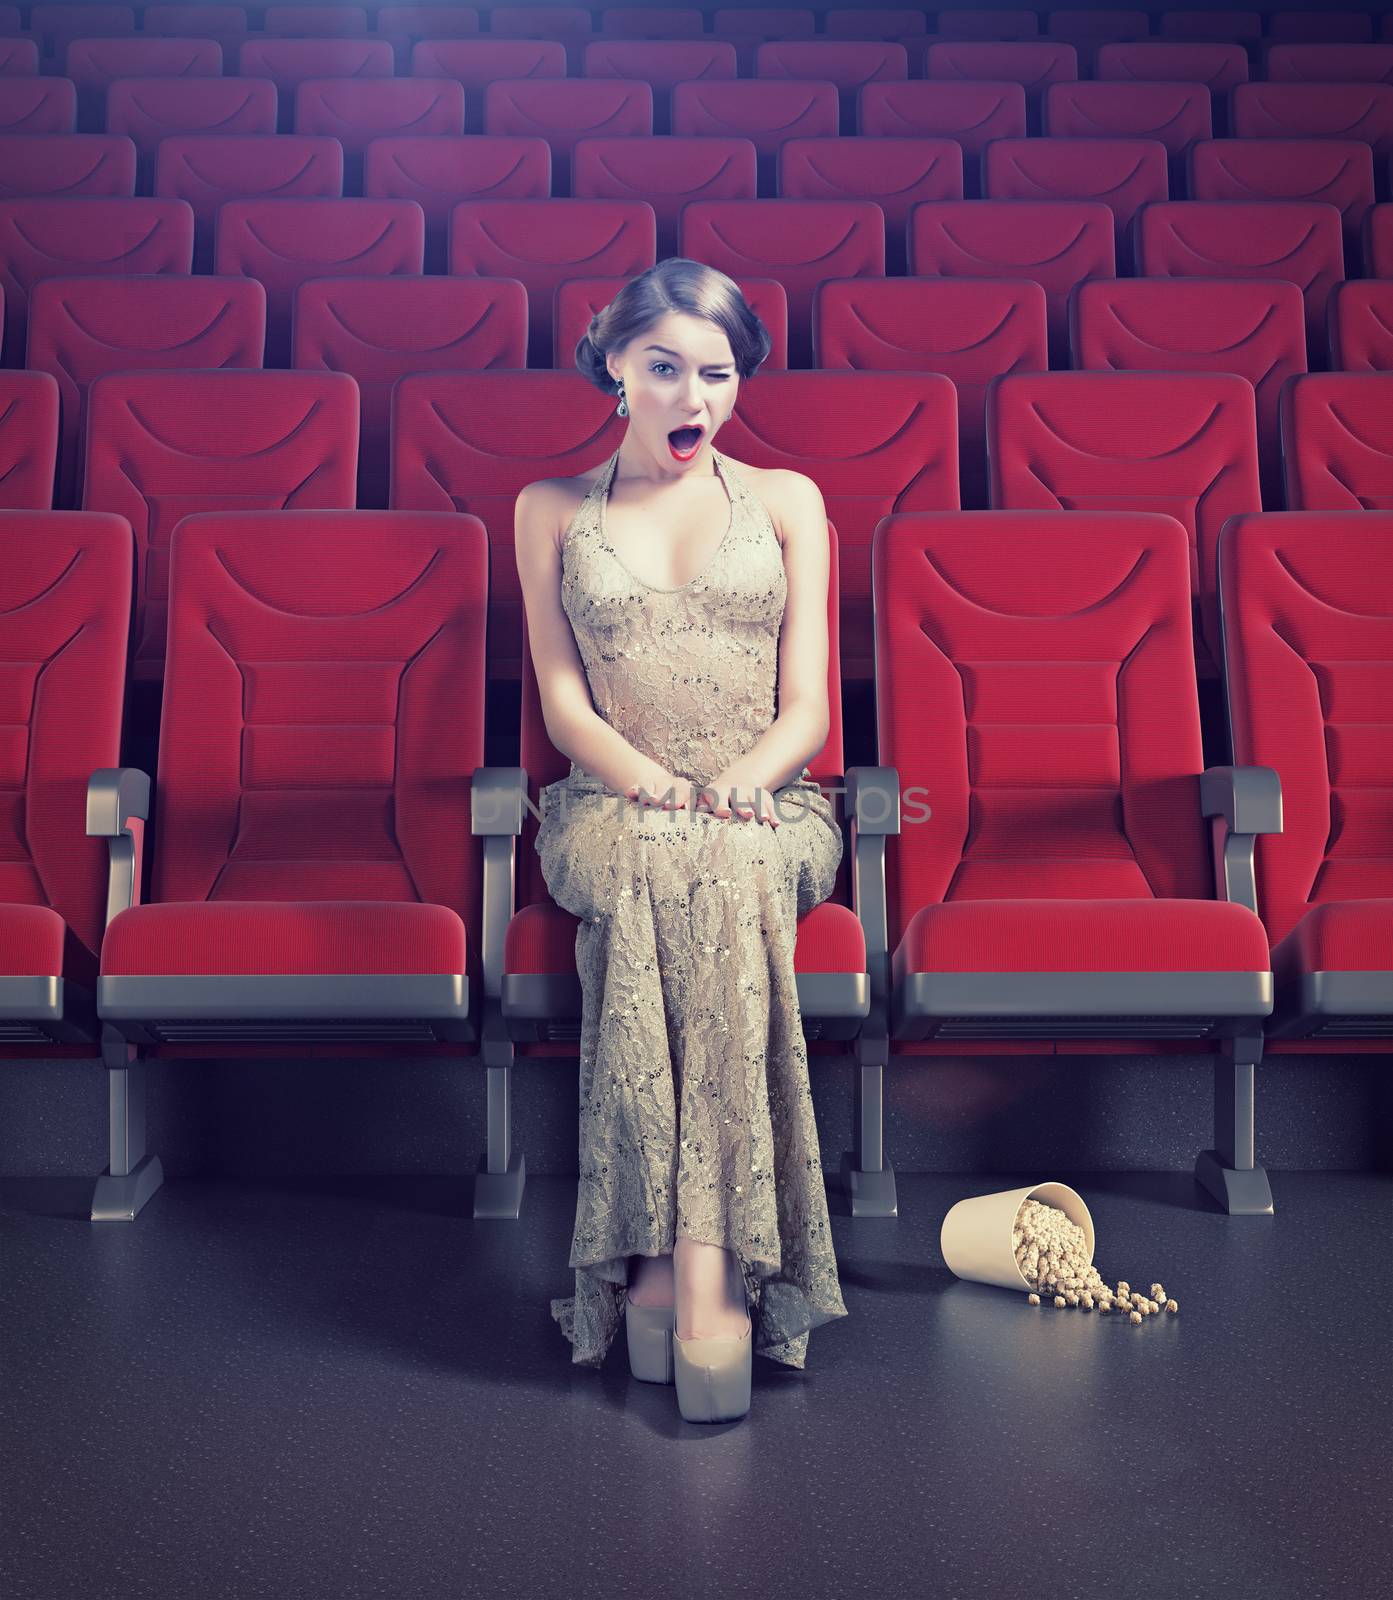 Surprised beautiful girl in an empty cinema. Creative concept